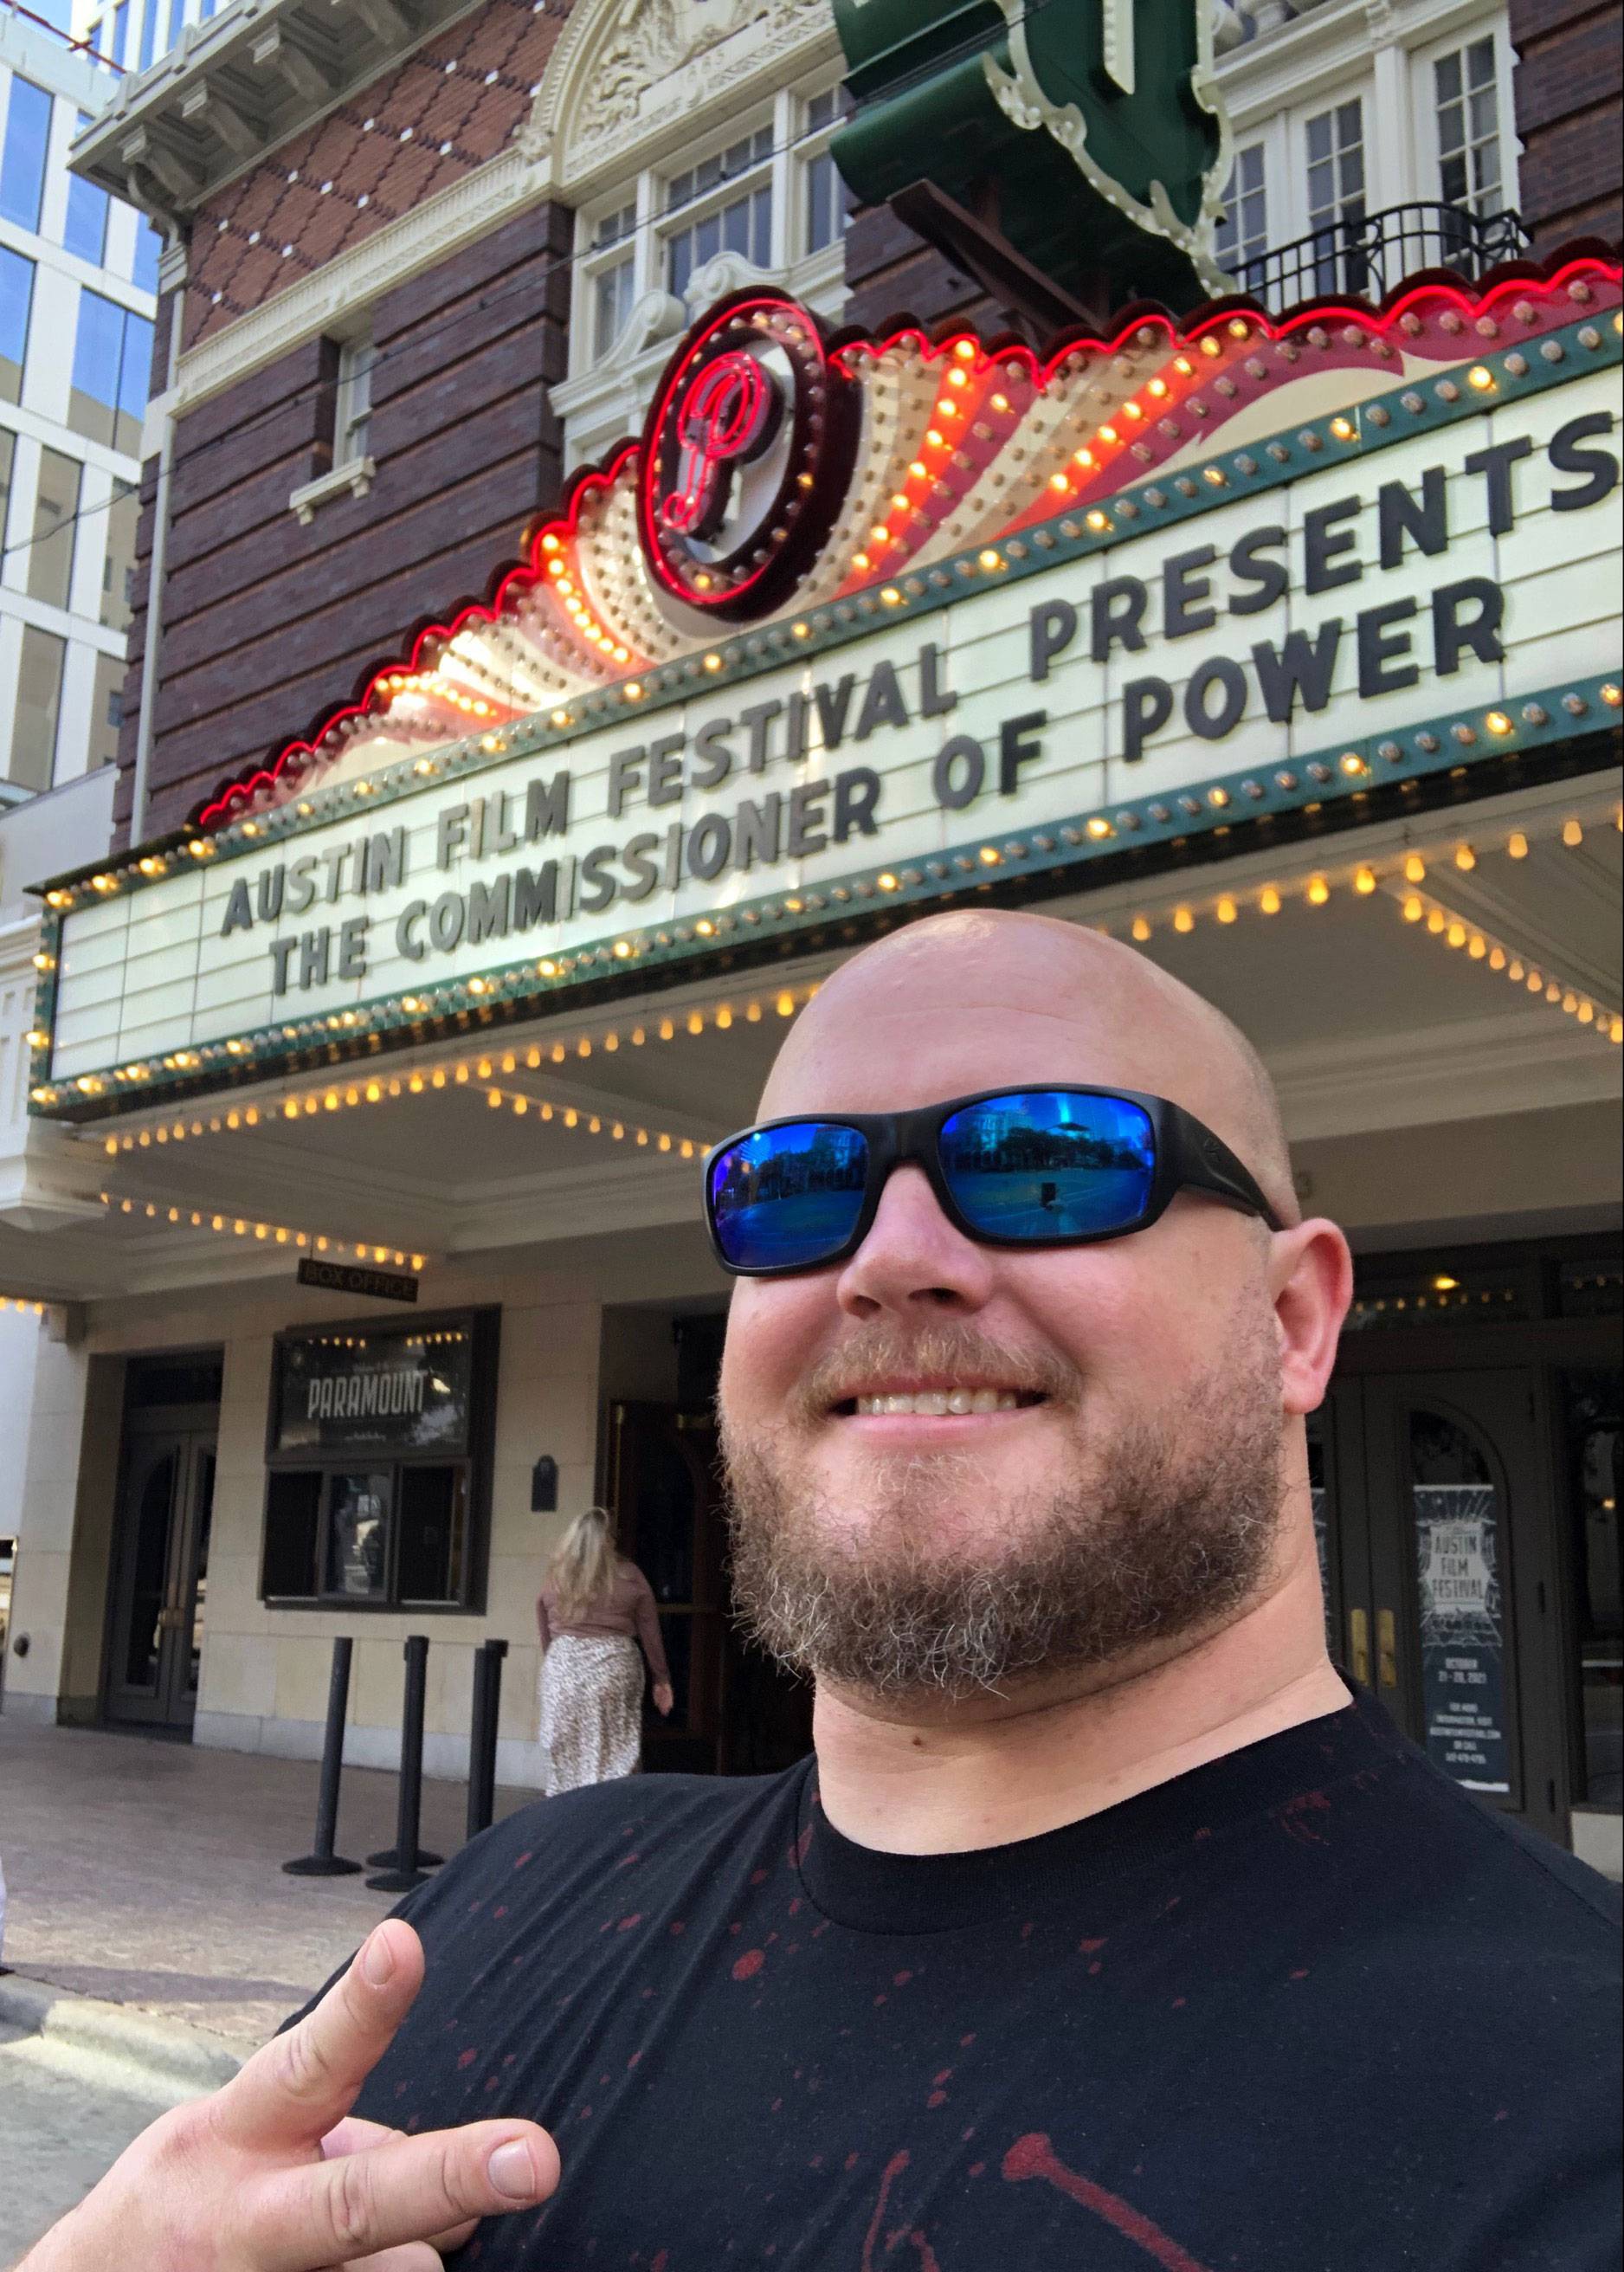 Bryan Sansom standing in front of the marquee for The Commissioner of Power